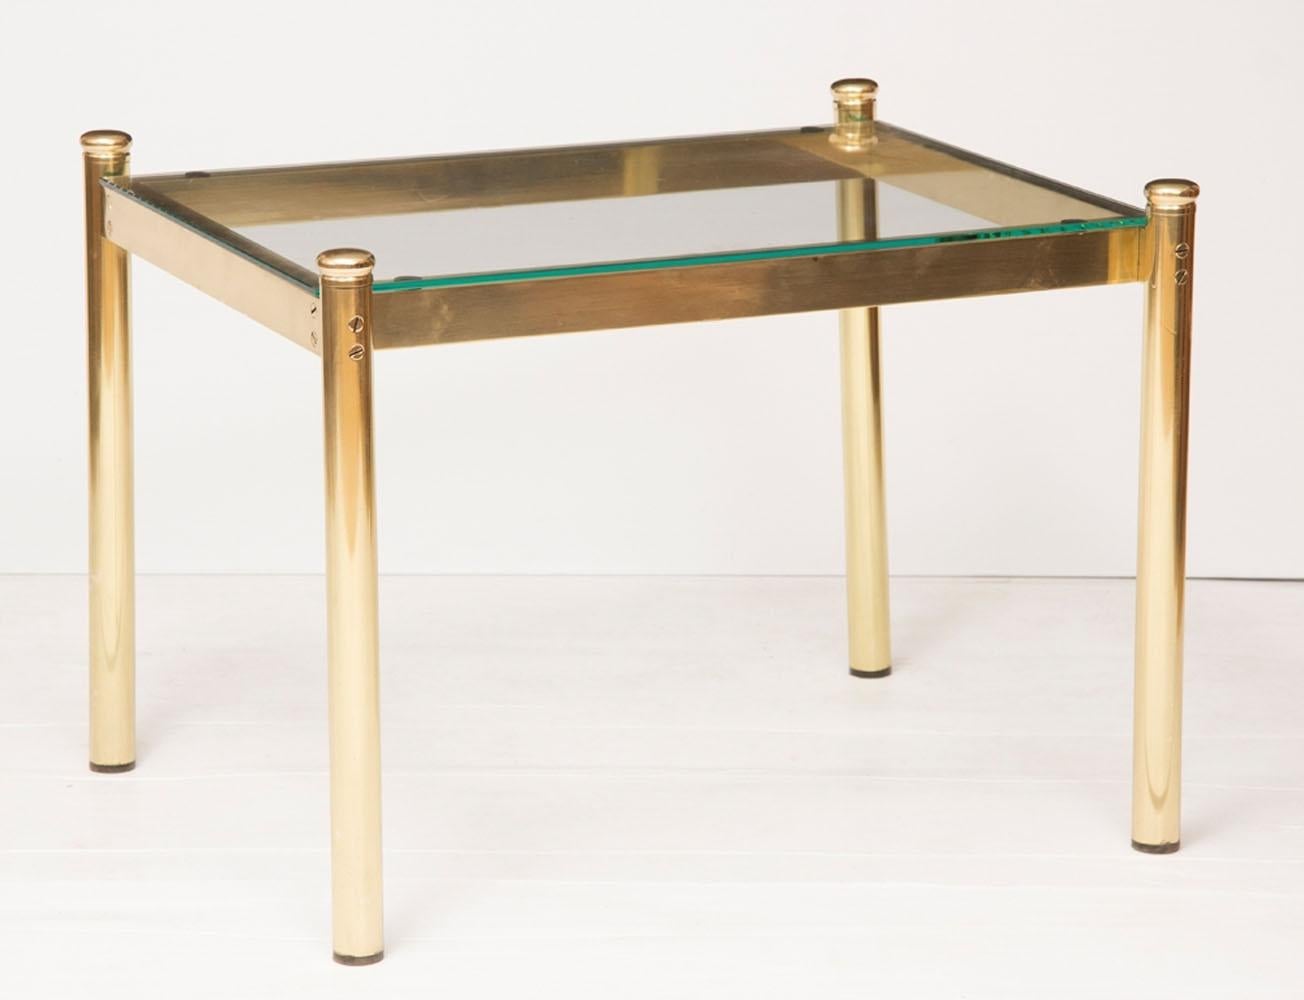 A pair of Hollywood Regency brass and glass coffee table.

These are in very good condition because they have been polished and sealed.